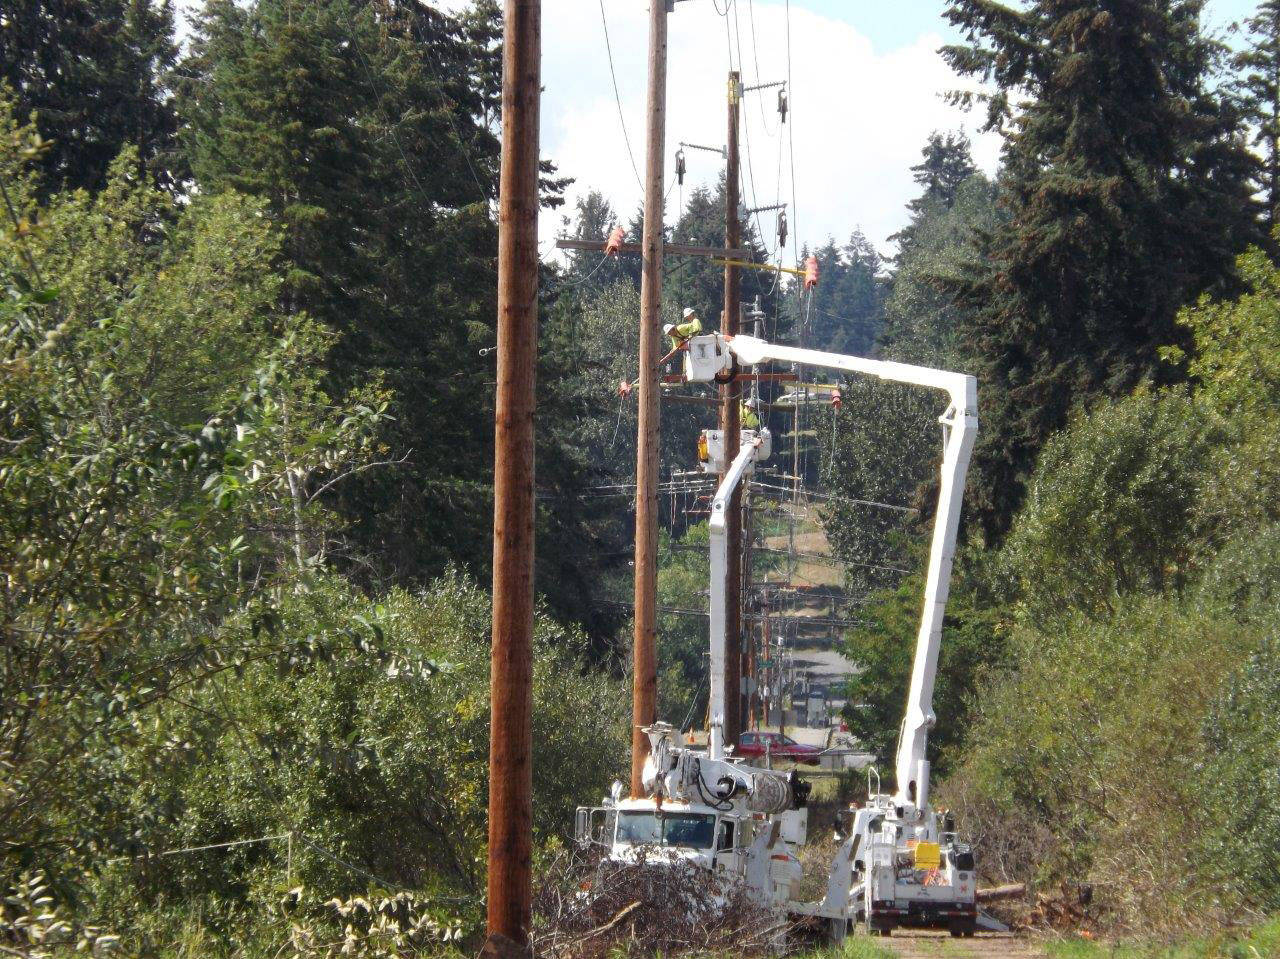 Multiple workers for PSE trim and remove trees to clear pathways for the utility lines. Photo courtesy of Puget Sound Energy.